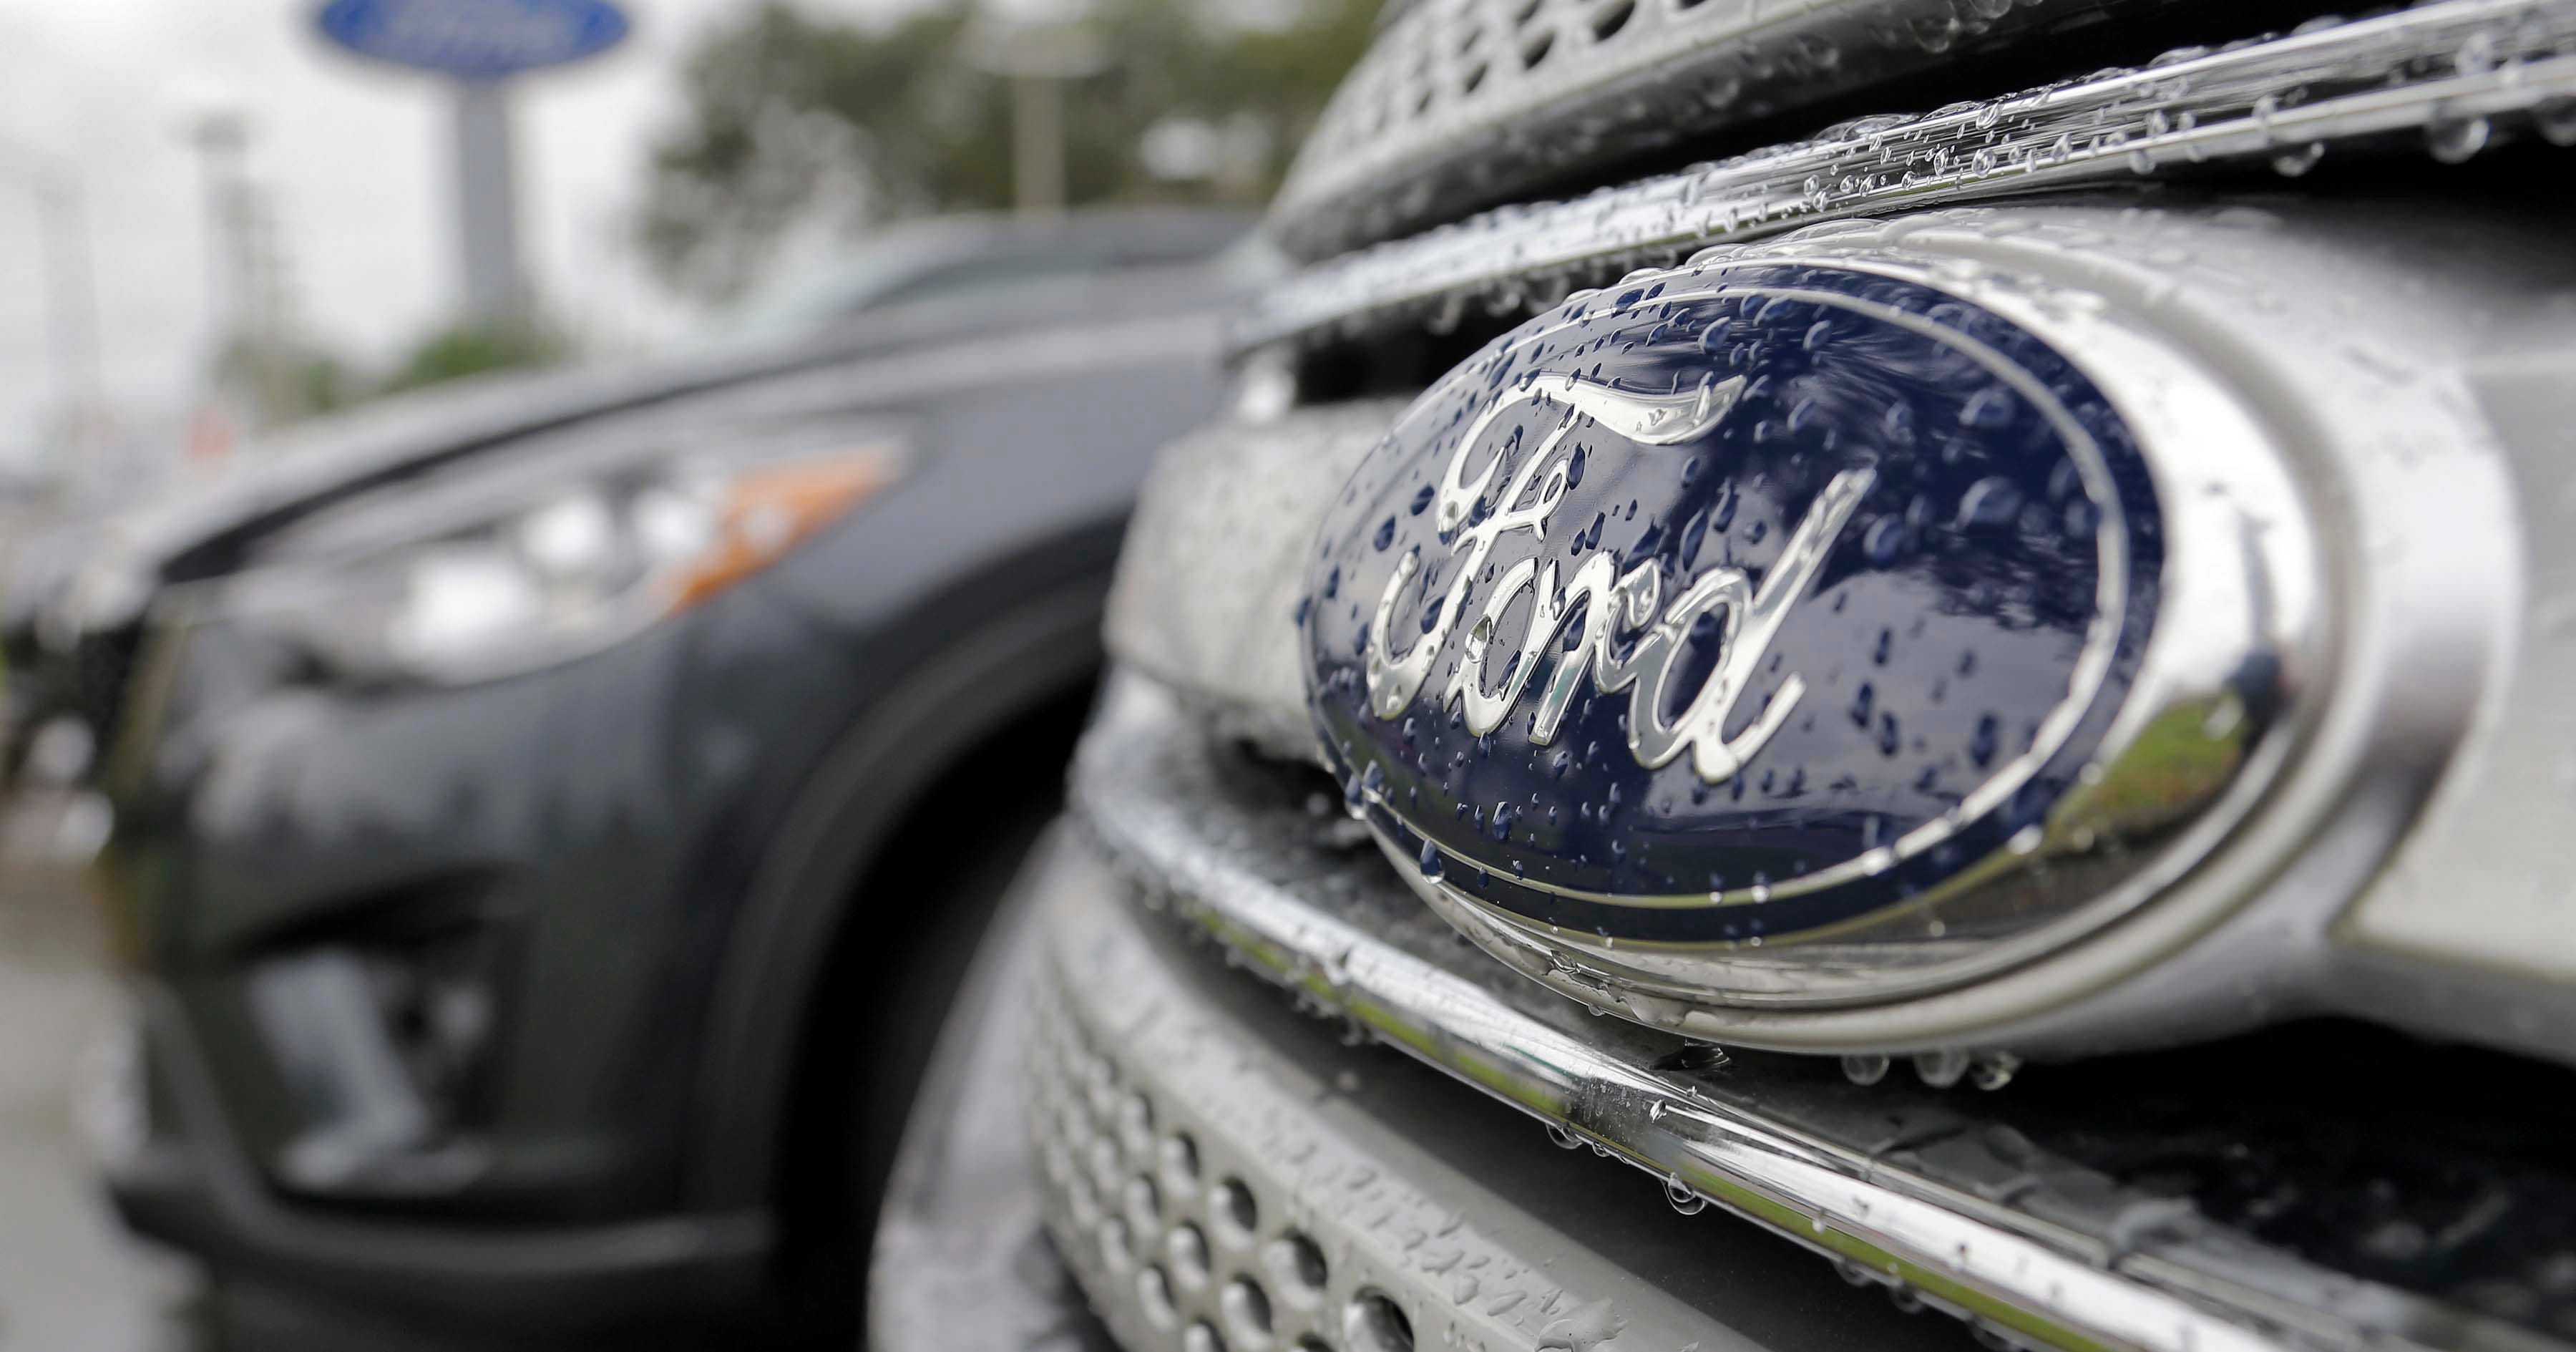 Ford plans to cut $25.5 billion in costs over the next several years through changes to product development, purchasing and manufacturing. The automaker plans to spend a separate $11 billion to restructure its global business, part of which will come from global white-collar layoffs.